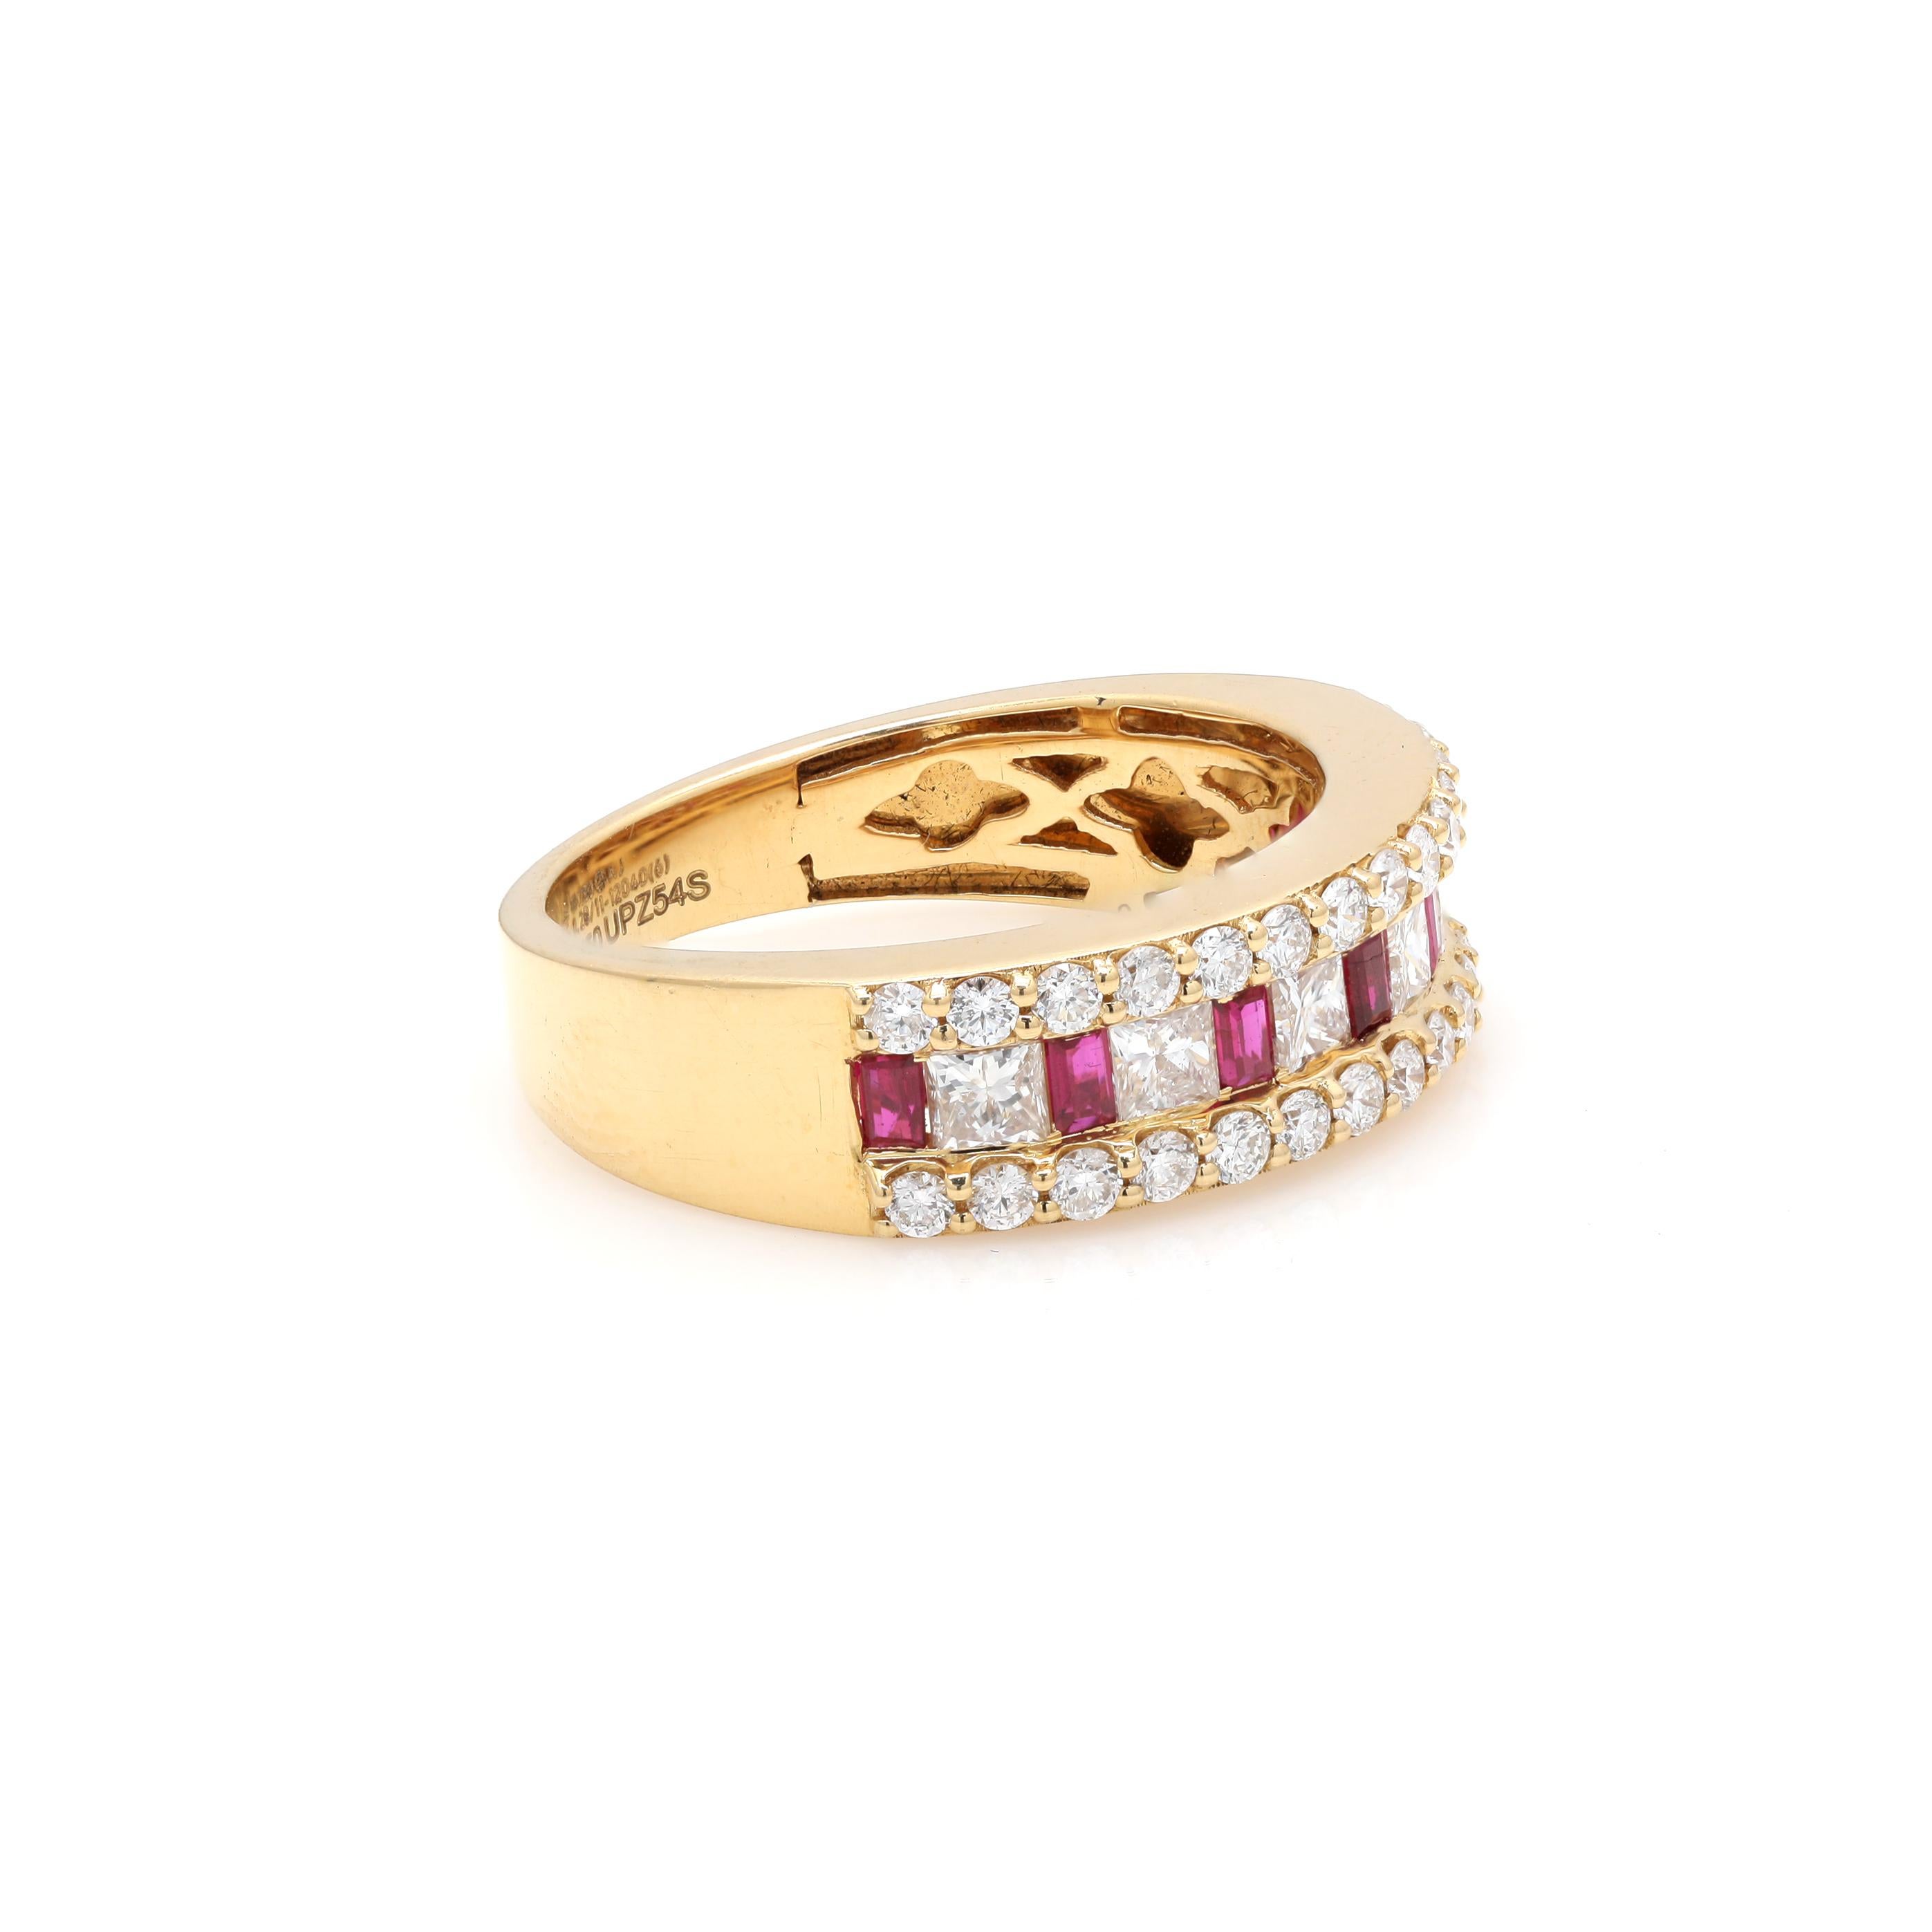 For Sale:  Stackable Half Eternity Ruby Engagement Ring in 18K Yellow Gold with Diamonds 2